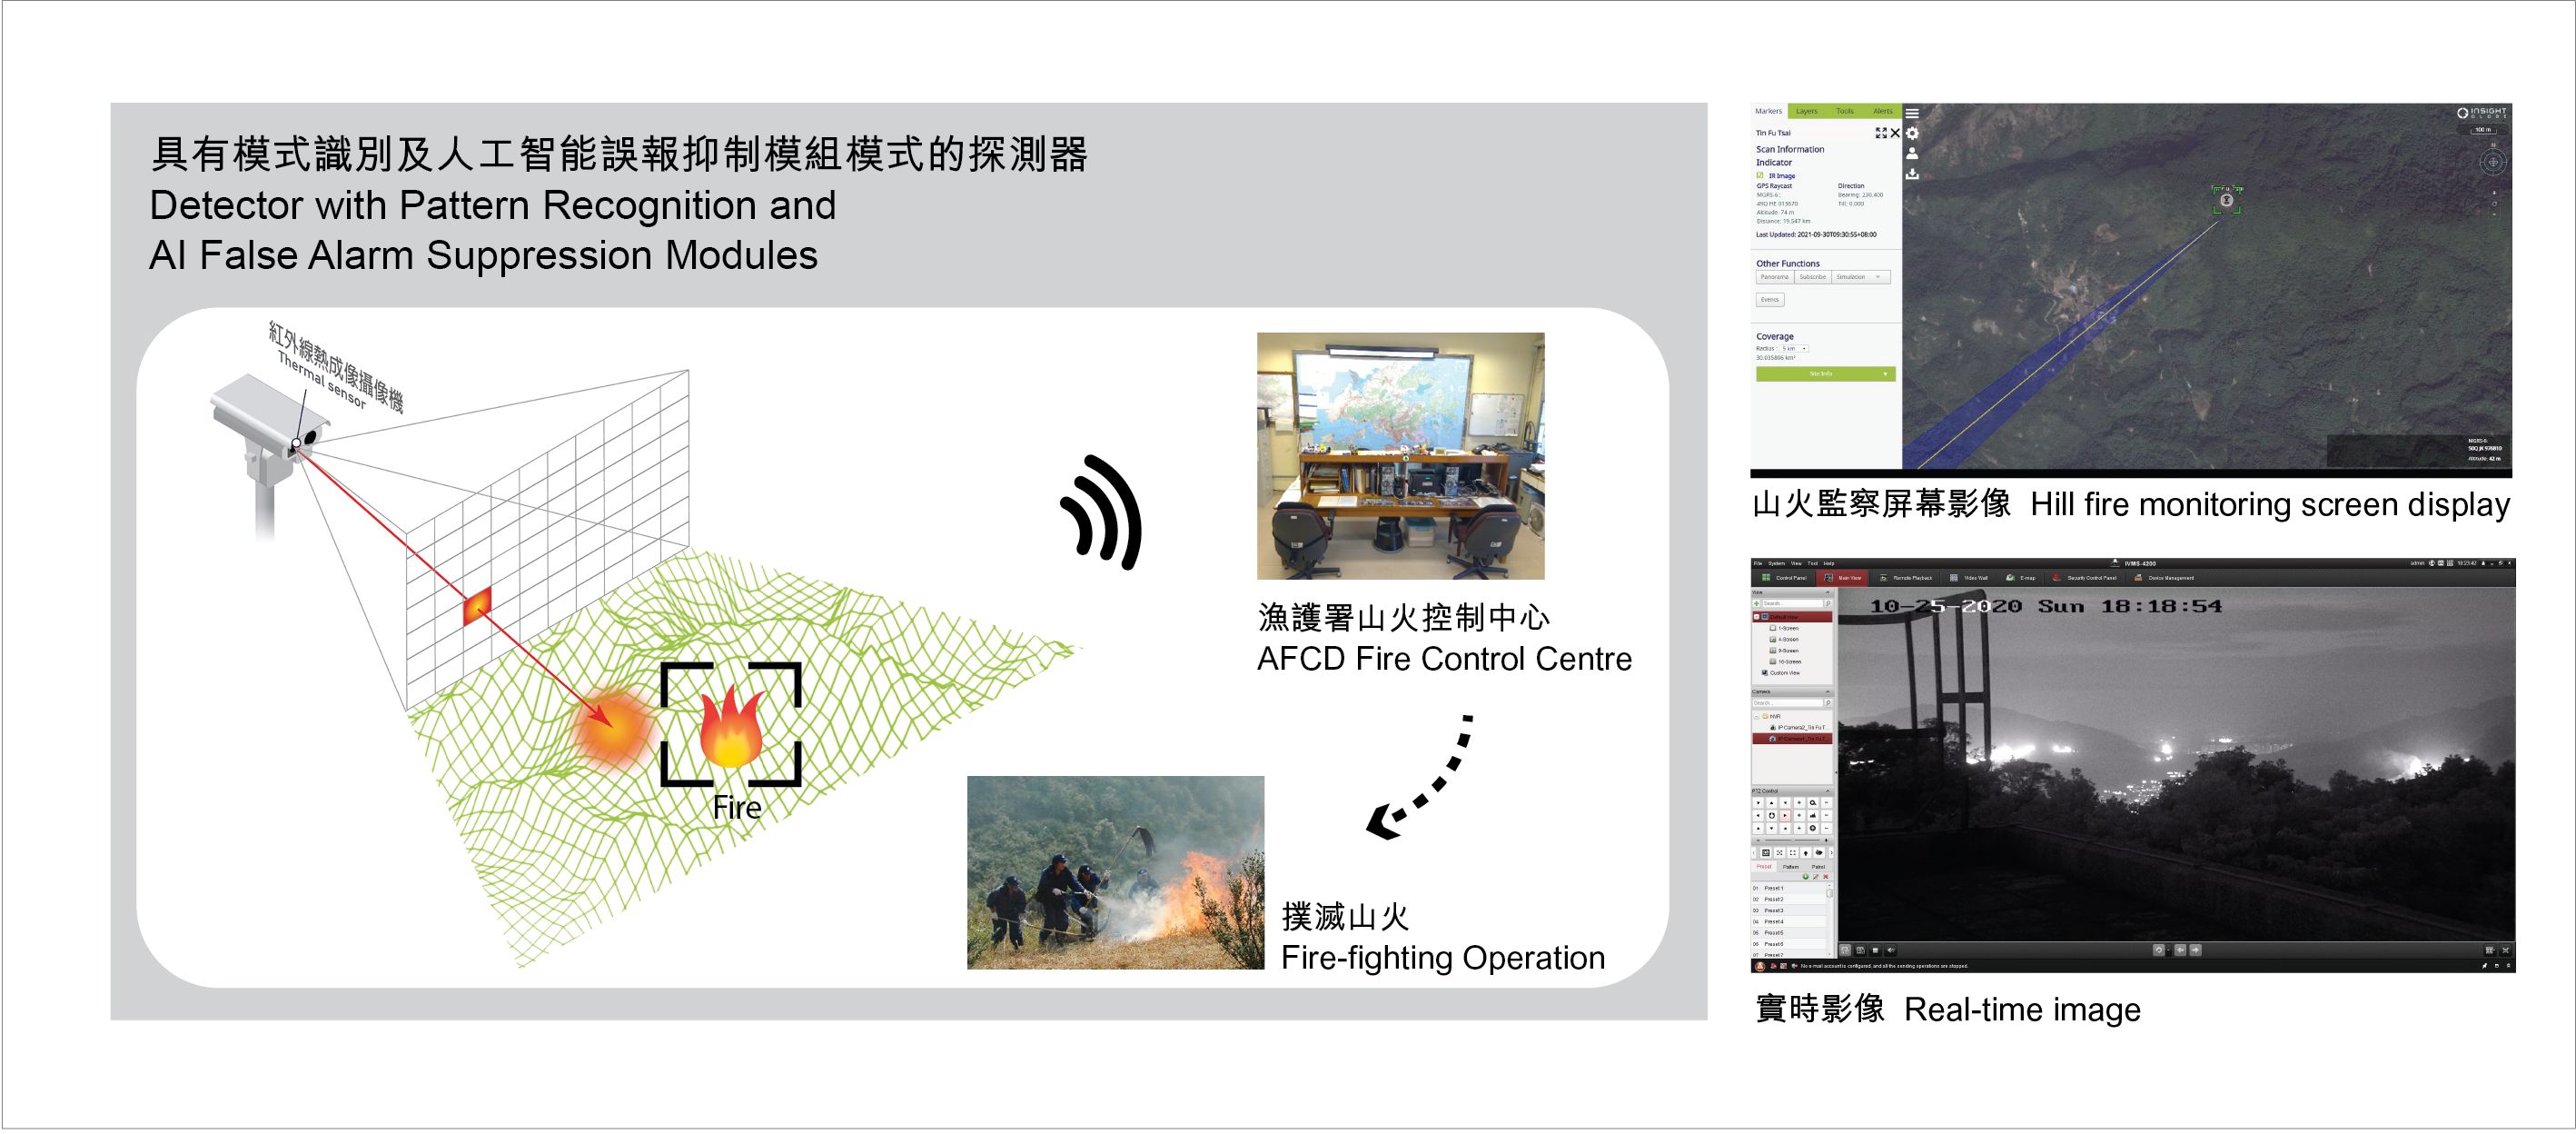 Detector with Pattern Recognition and_x0003_AI False Alarm Suppression Modules, AFCD Fire Control Centre, Fire-fighting Operation, Hill fire monitoring screen display, Real-time image